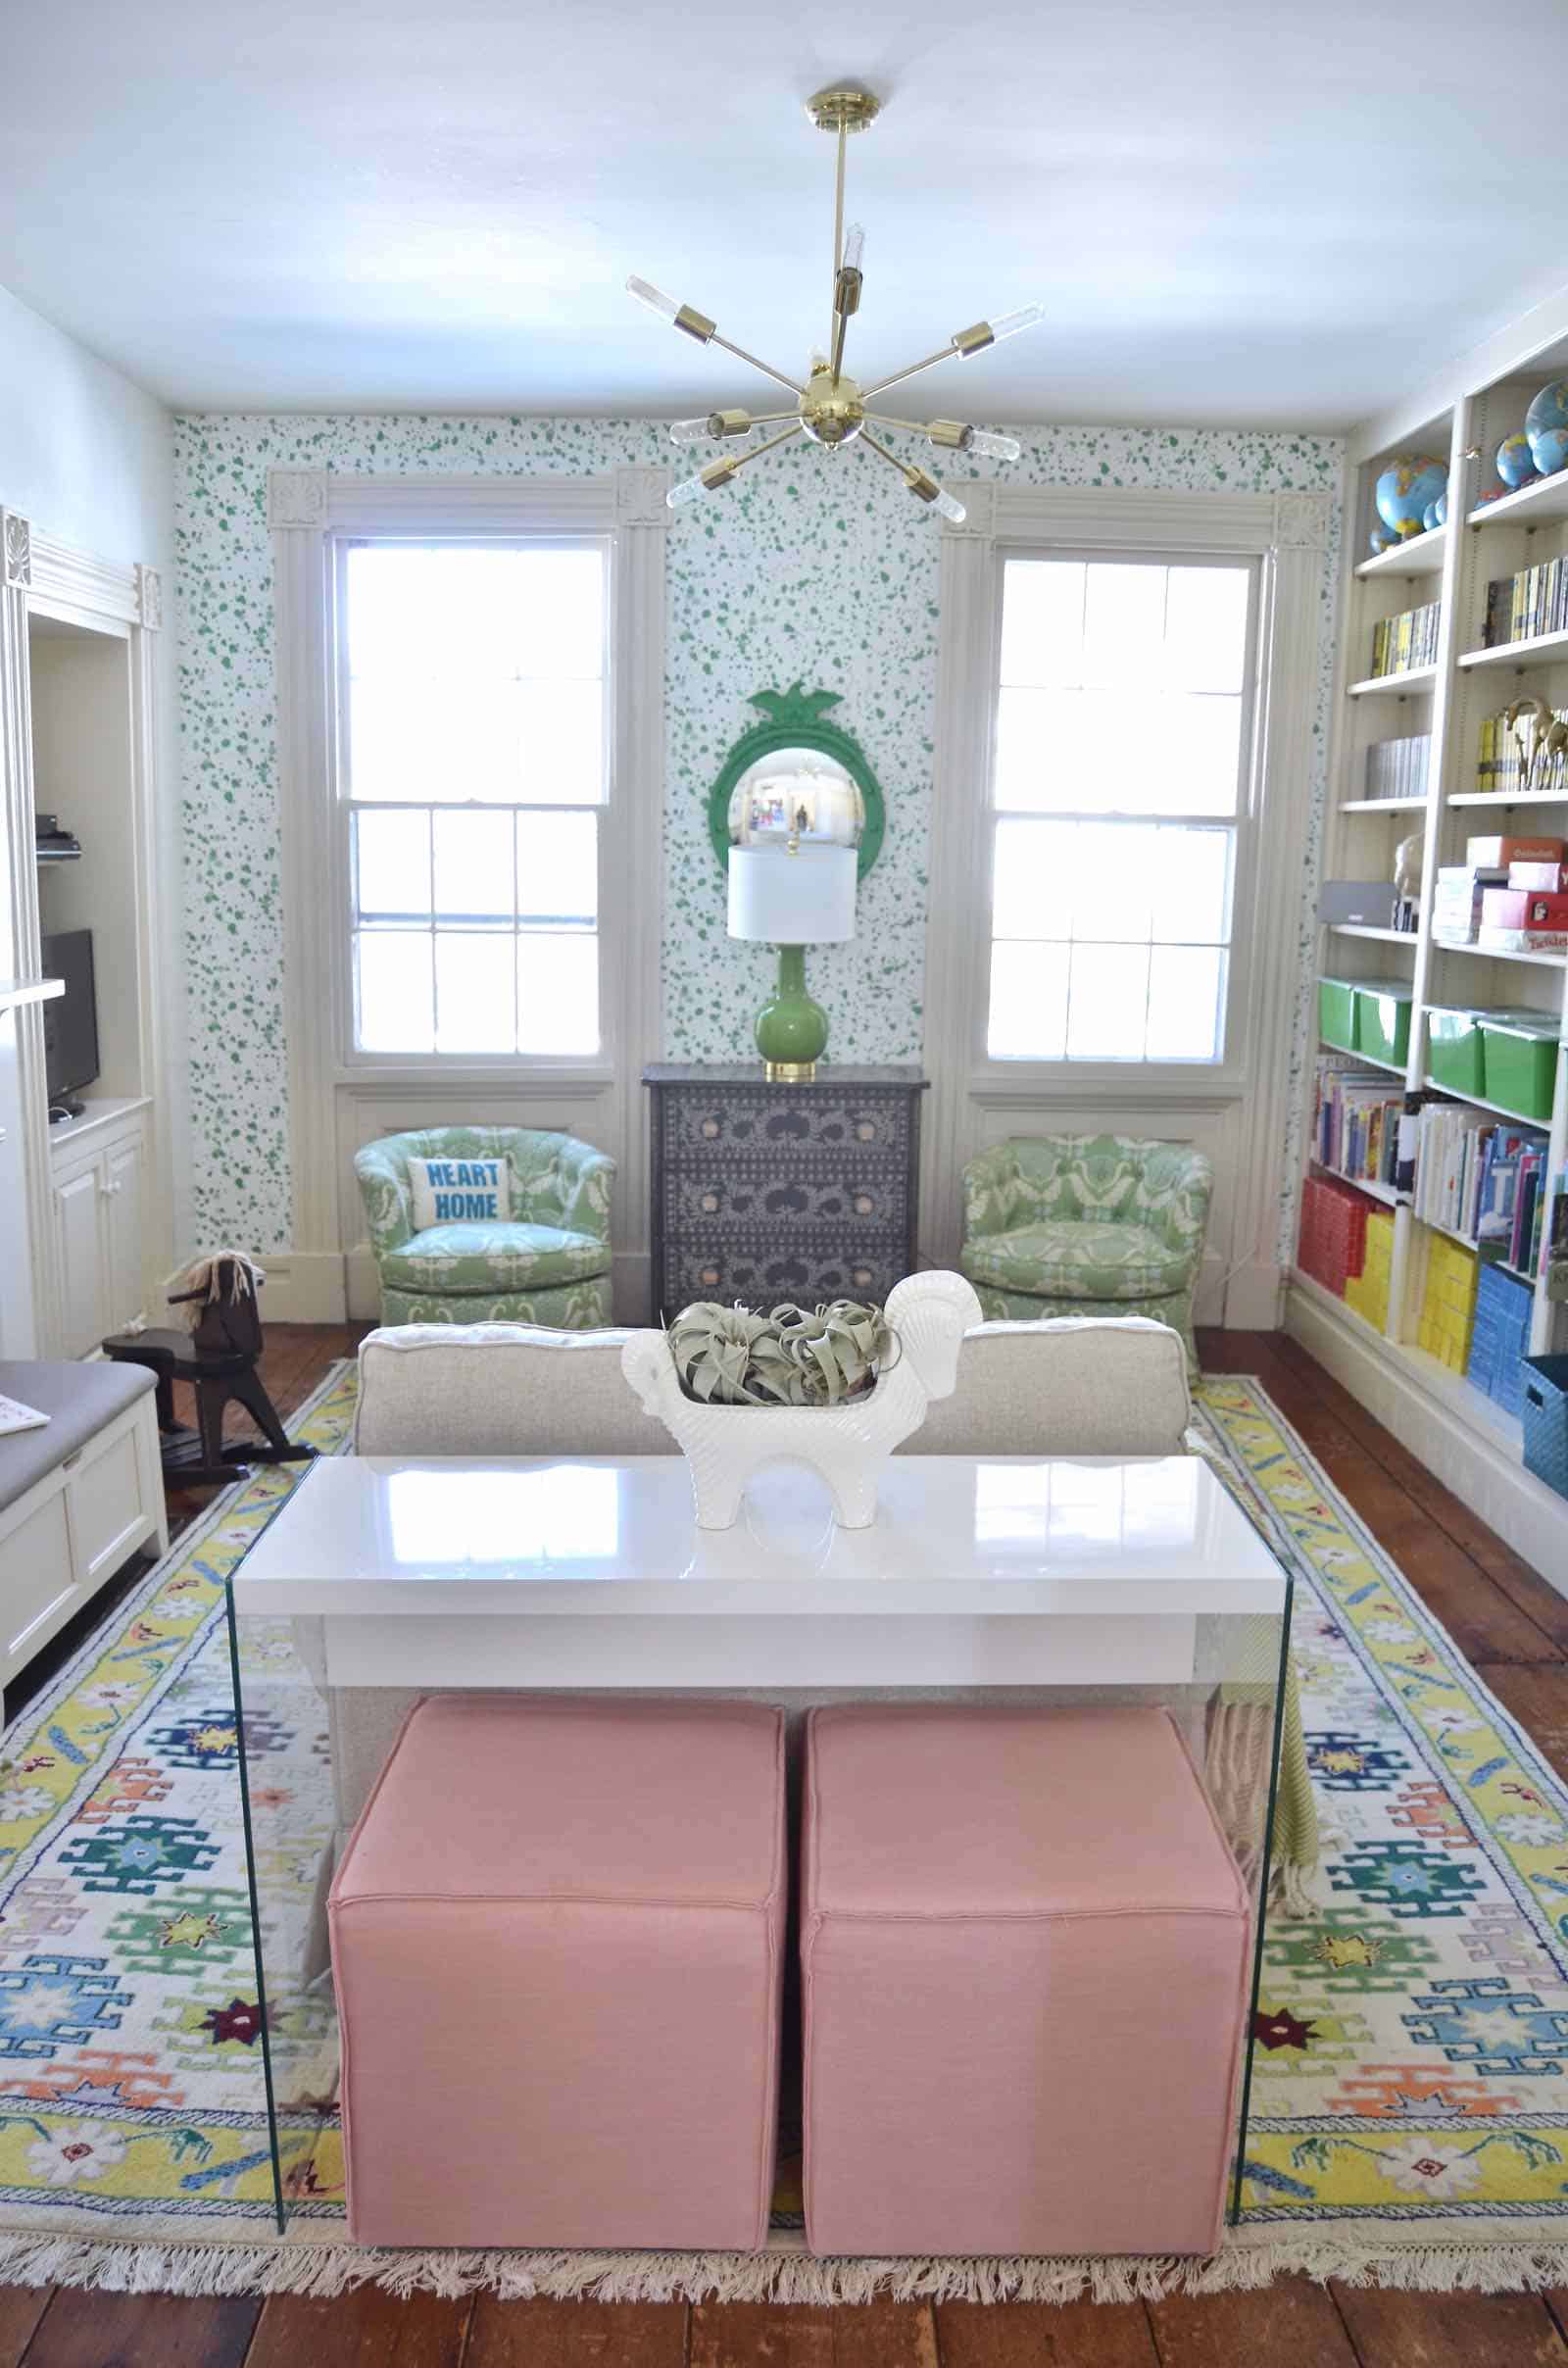 CT historic home gets a colorful makeover... home tour!